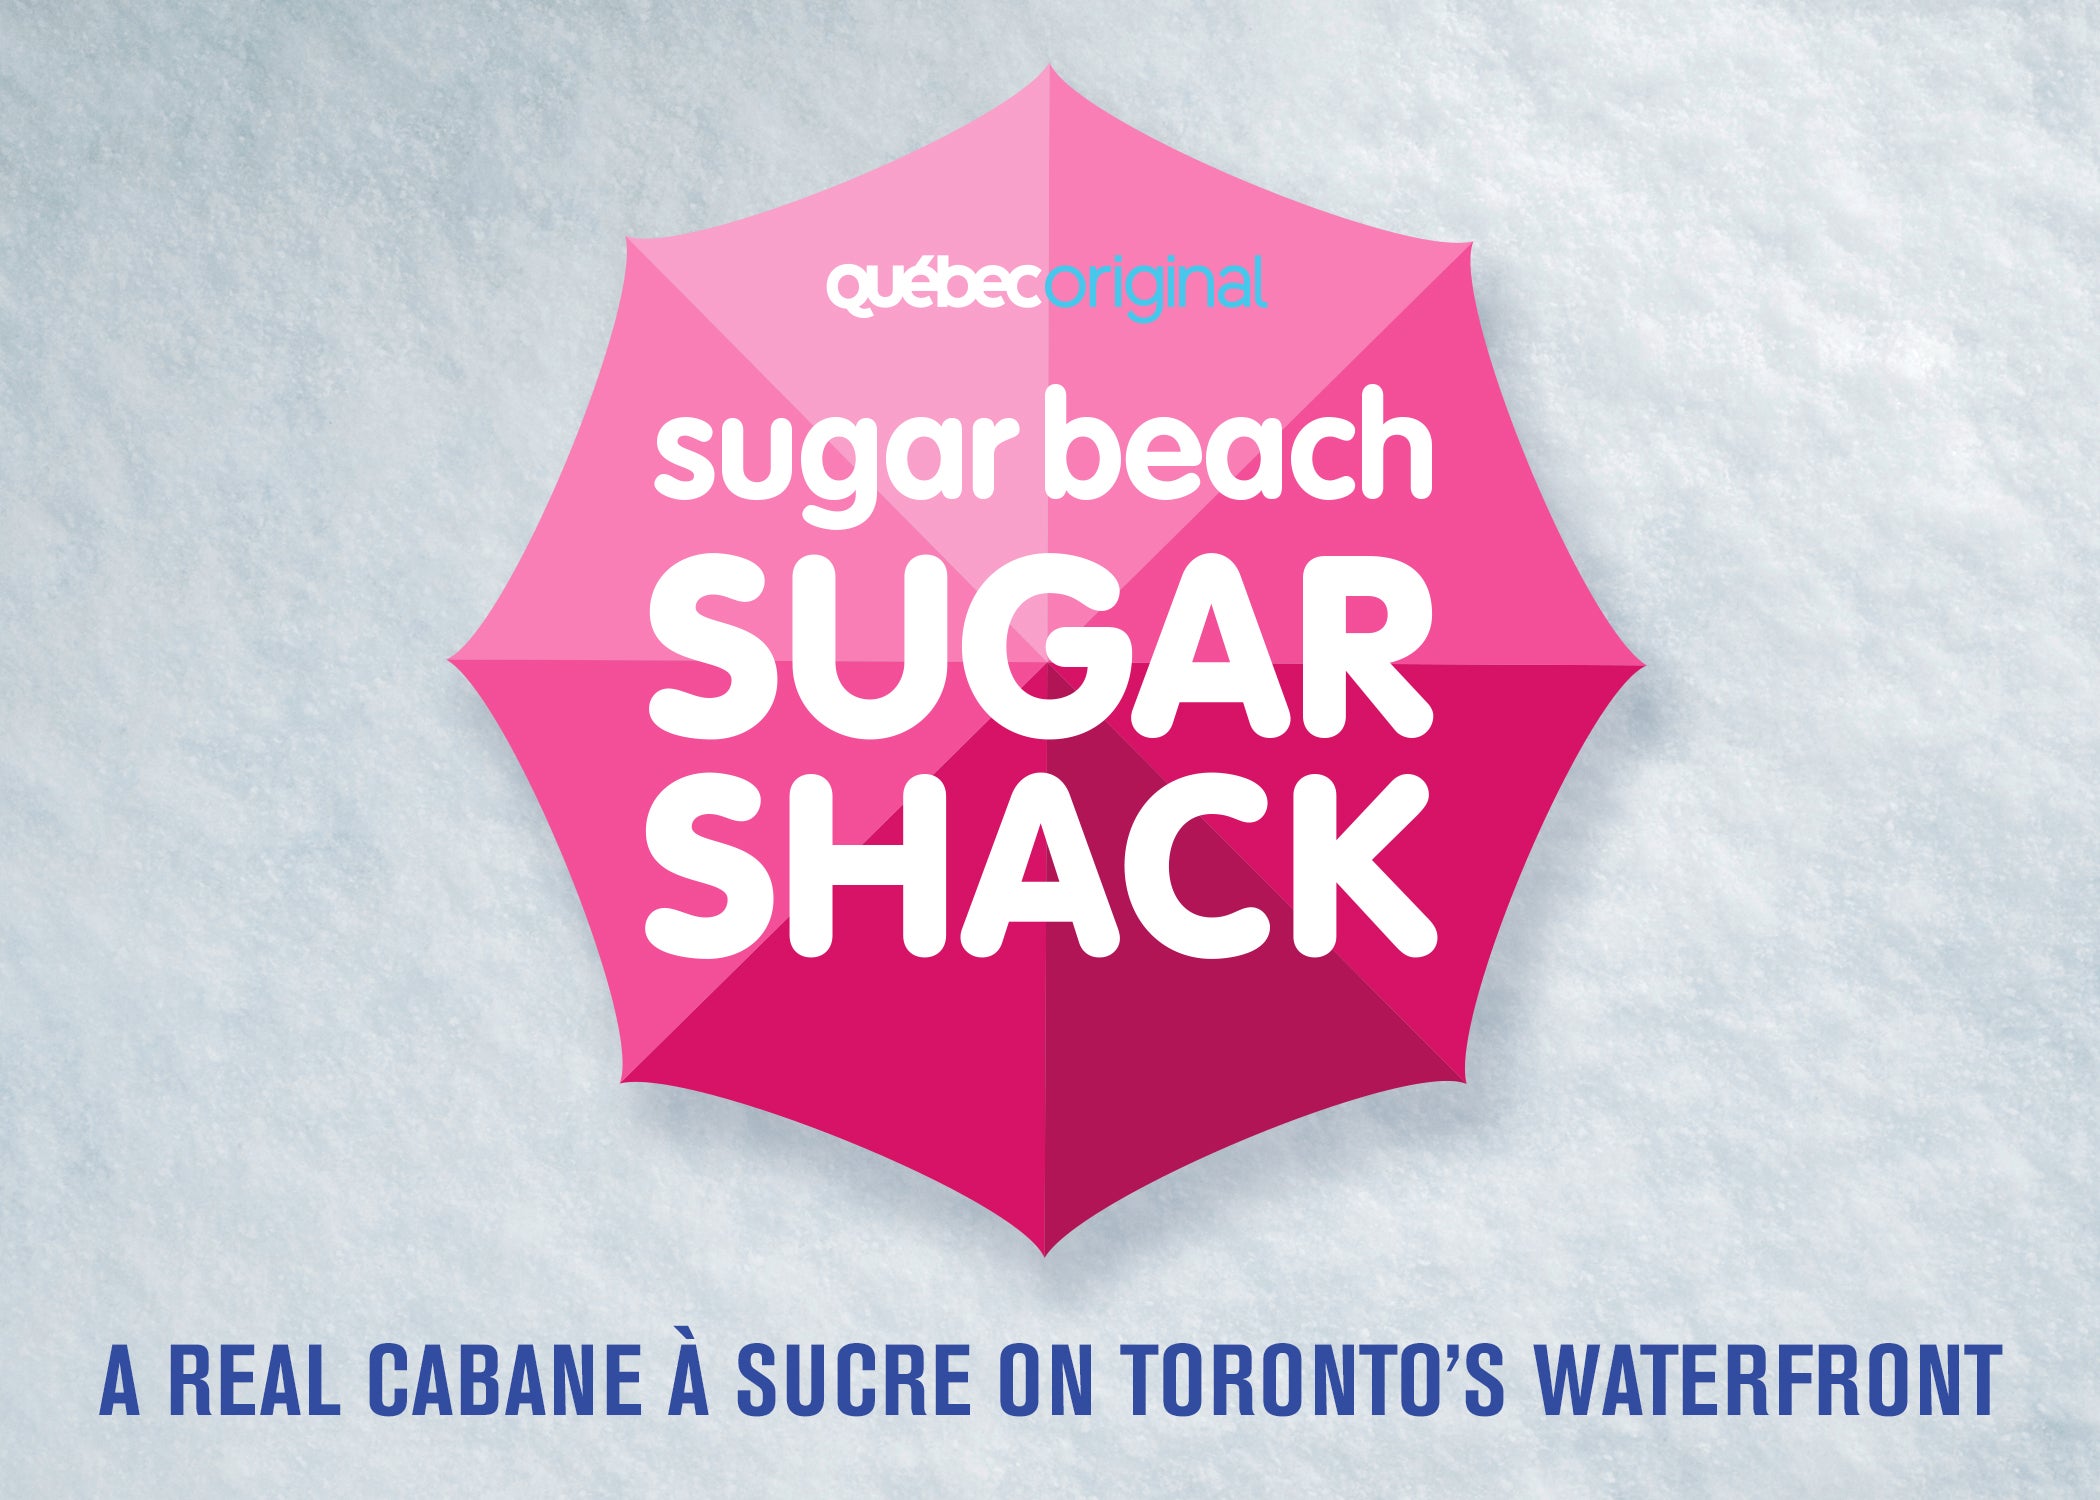 You're invited to a traditional cabane à sucre this March Break at Canada's Sugar Beach